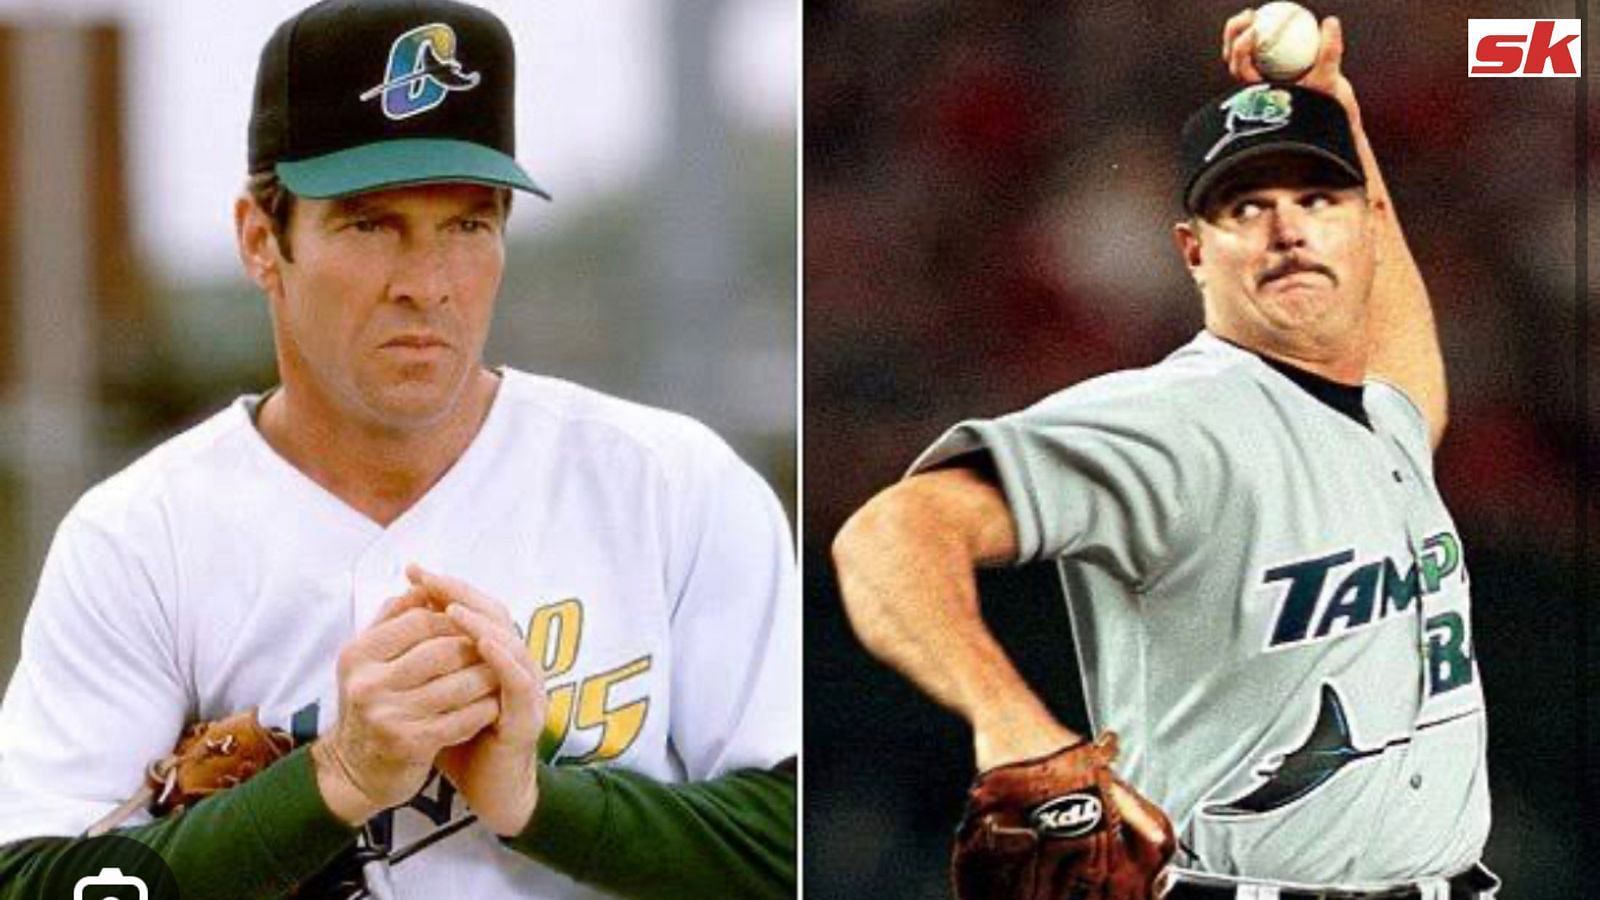 The Rookie is based on the real life story of Jim Morris